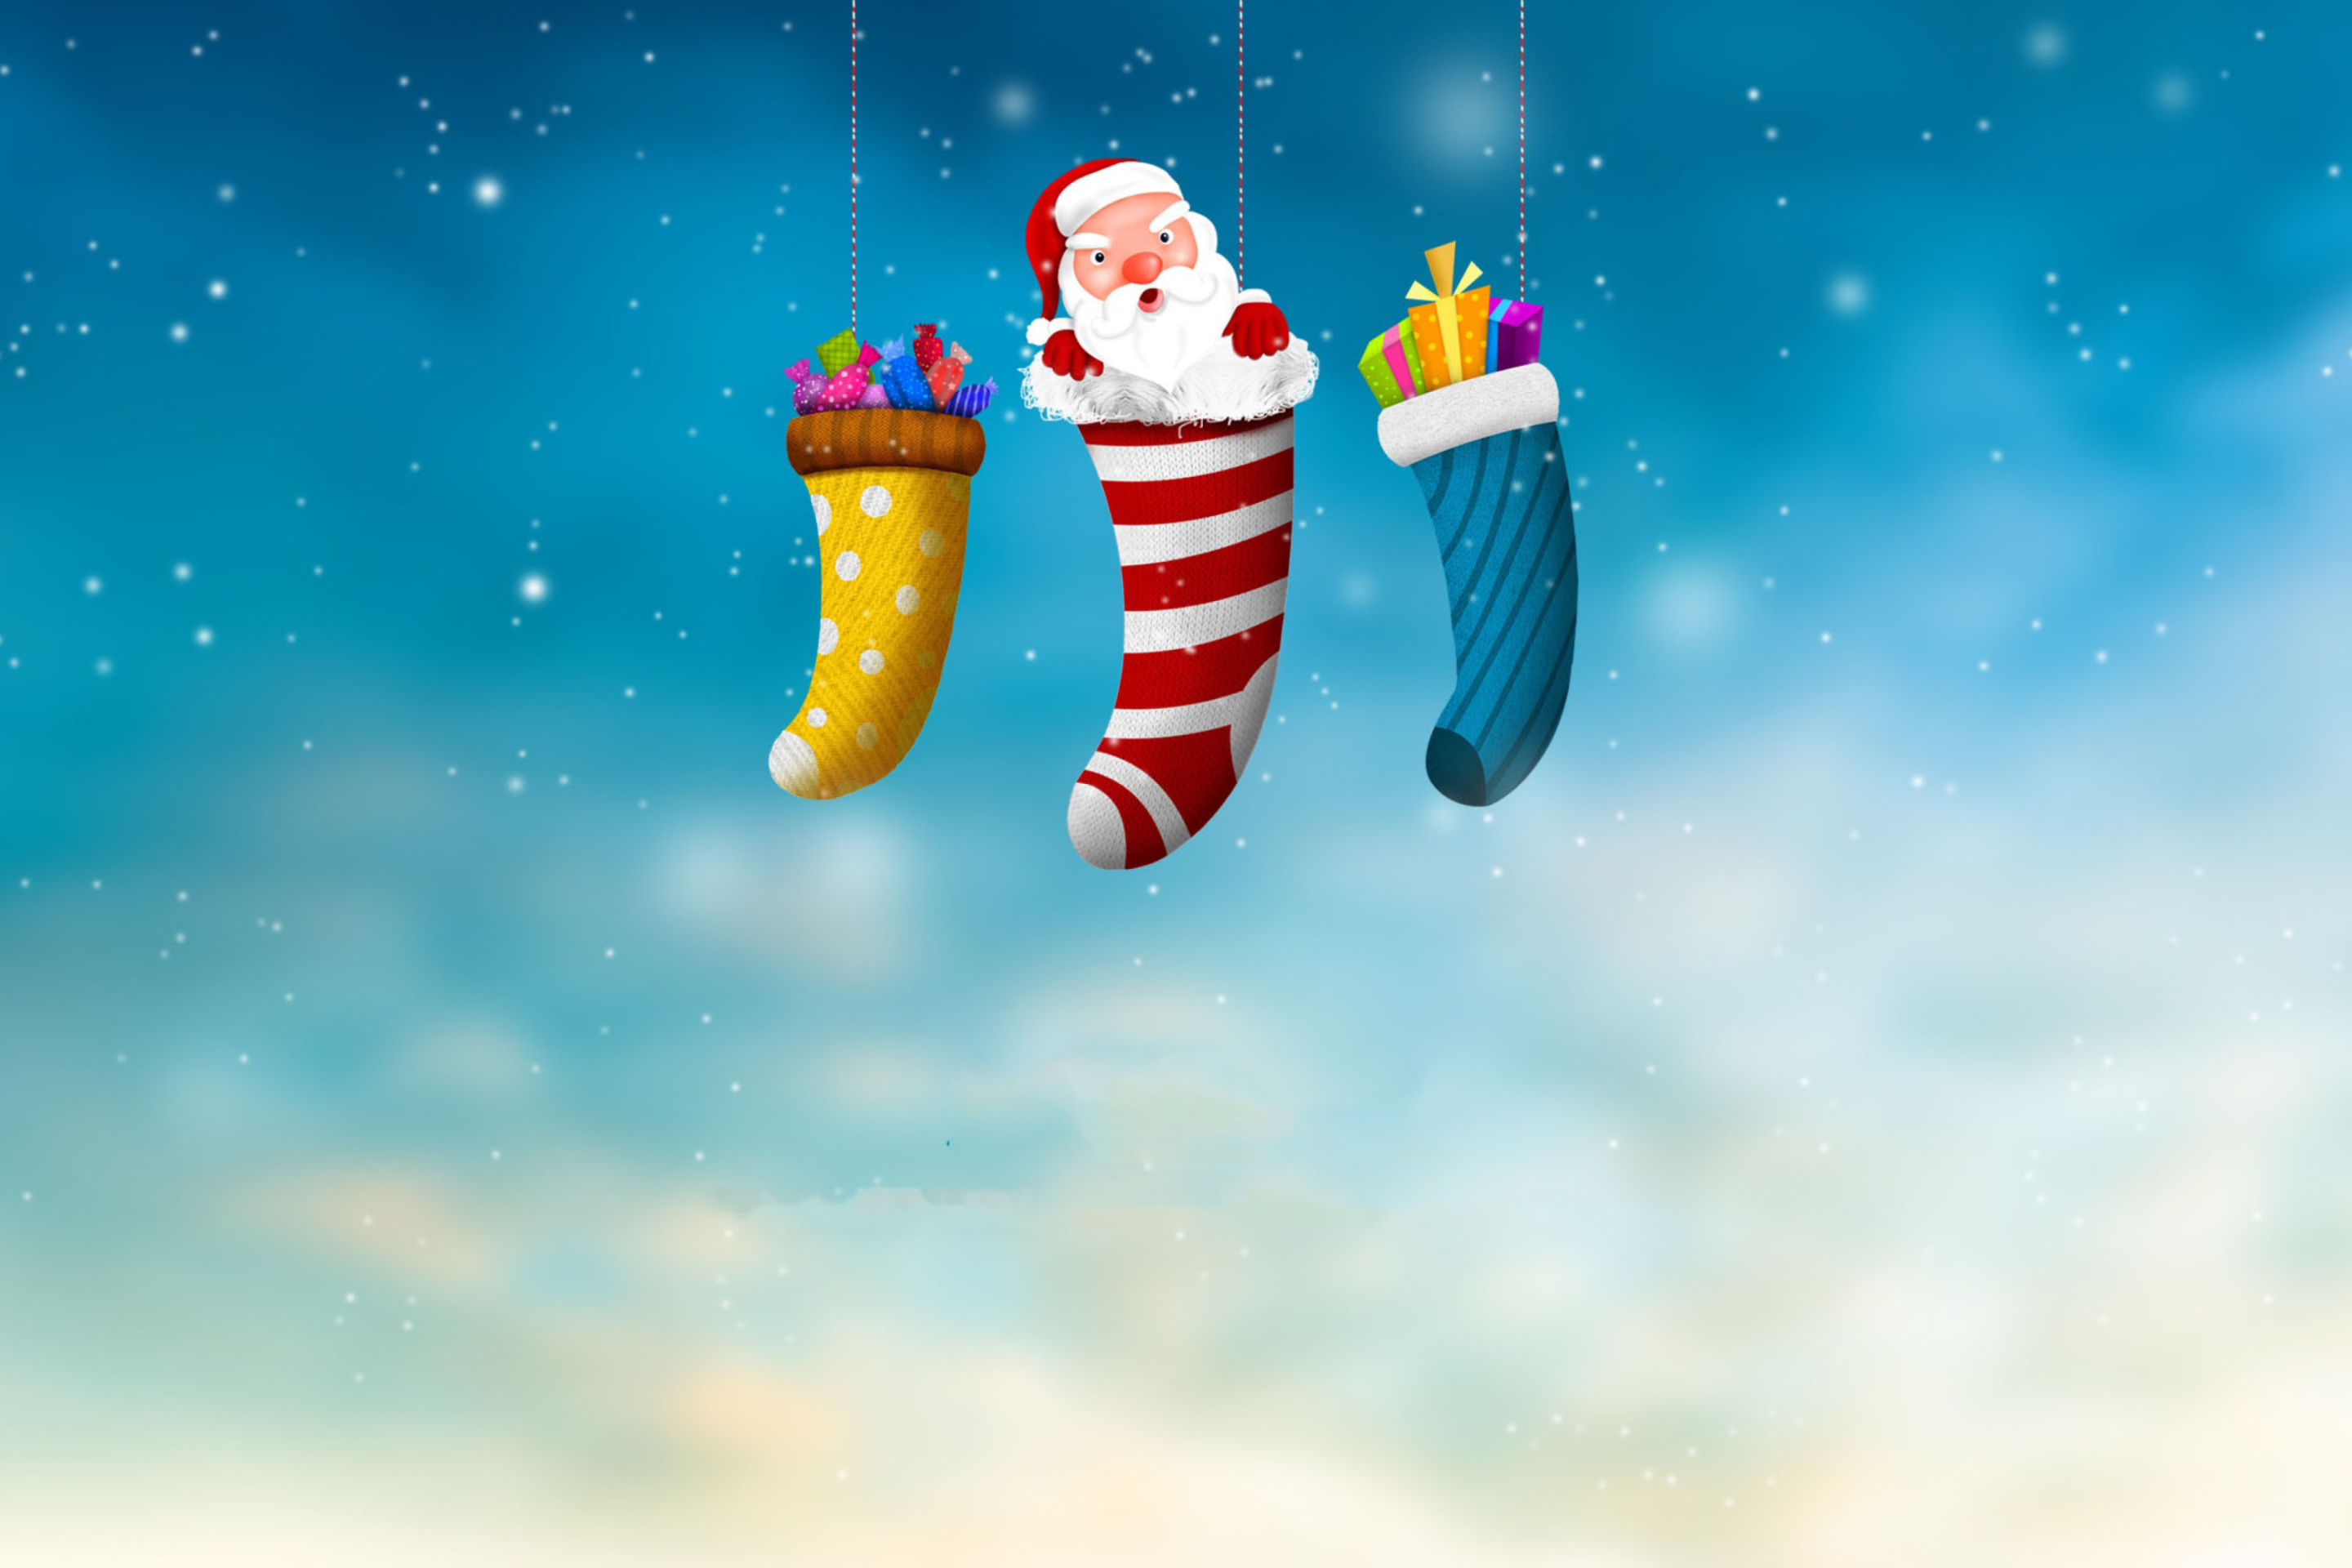 Santa Is Coming To Town wallpaper 2880x1920